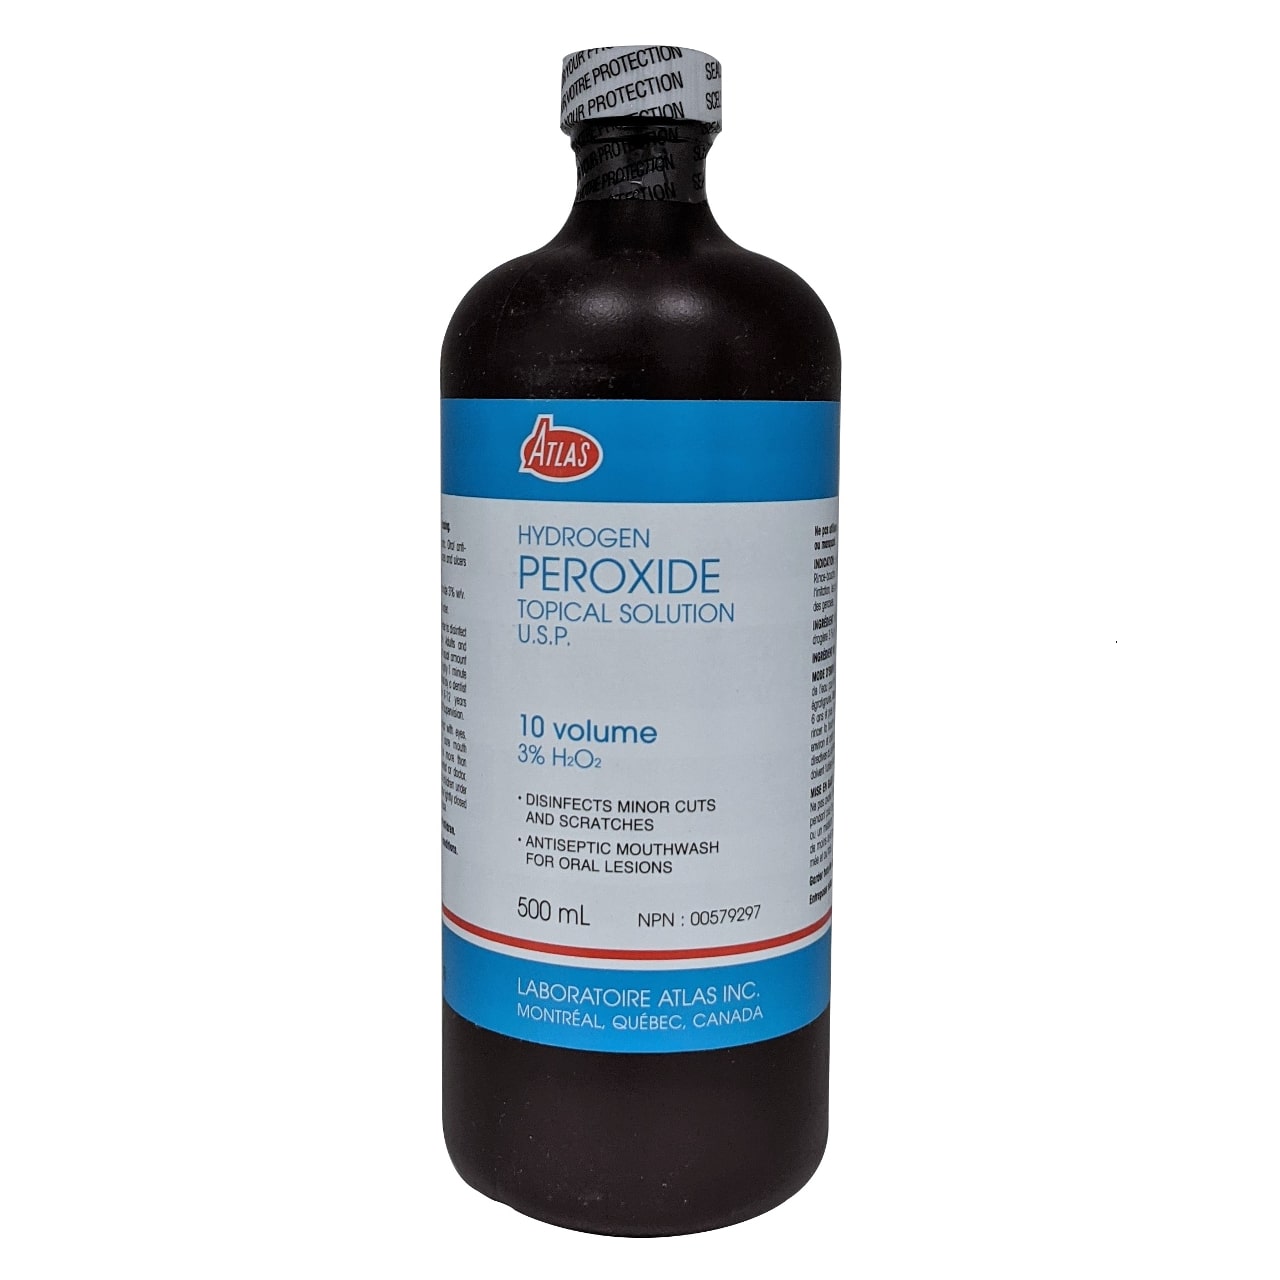 Product label for Atlas Hydrogen Peroxide Topical Solution USP 3% (500 mL) in English